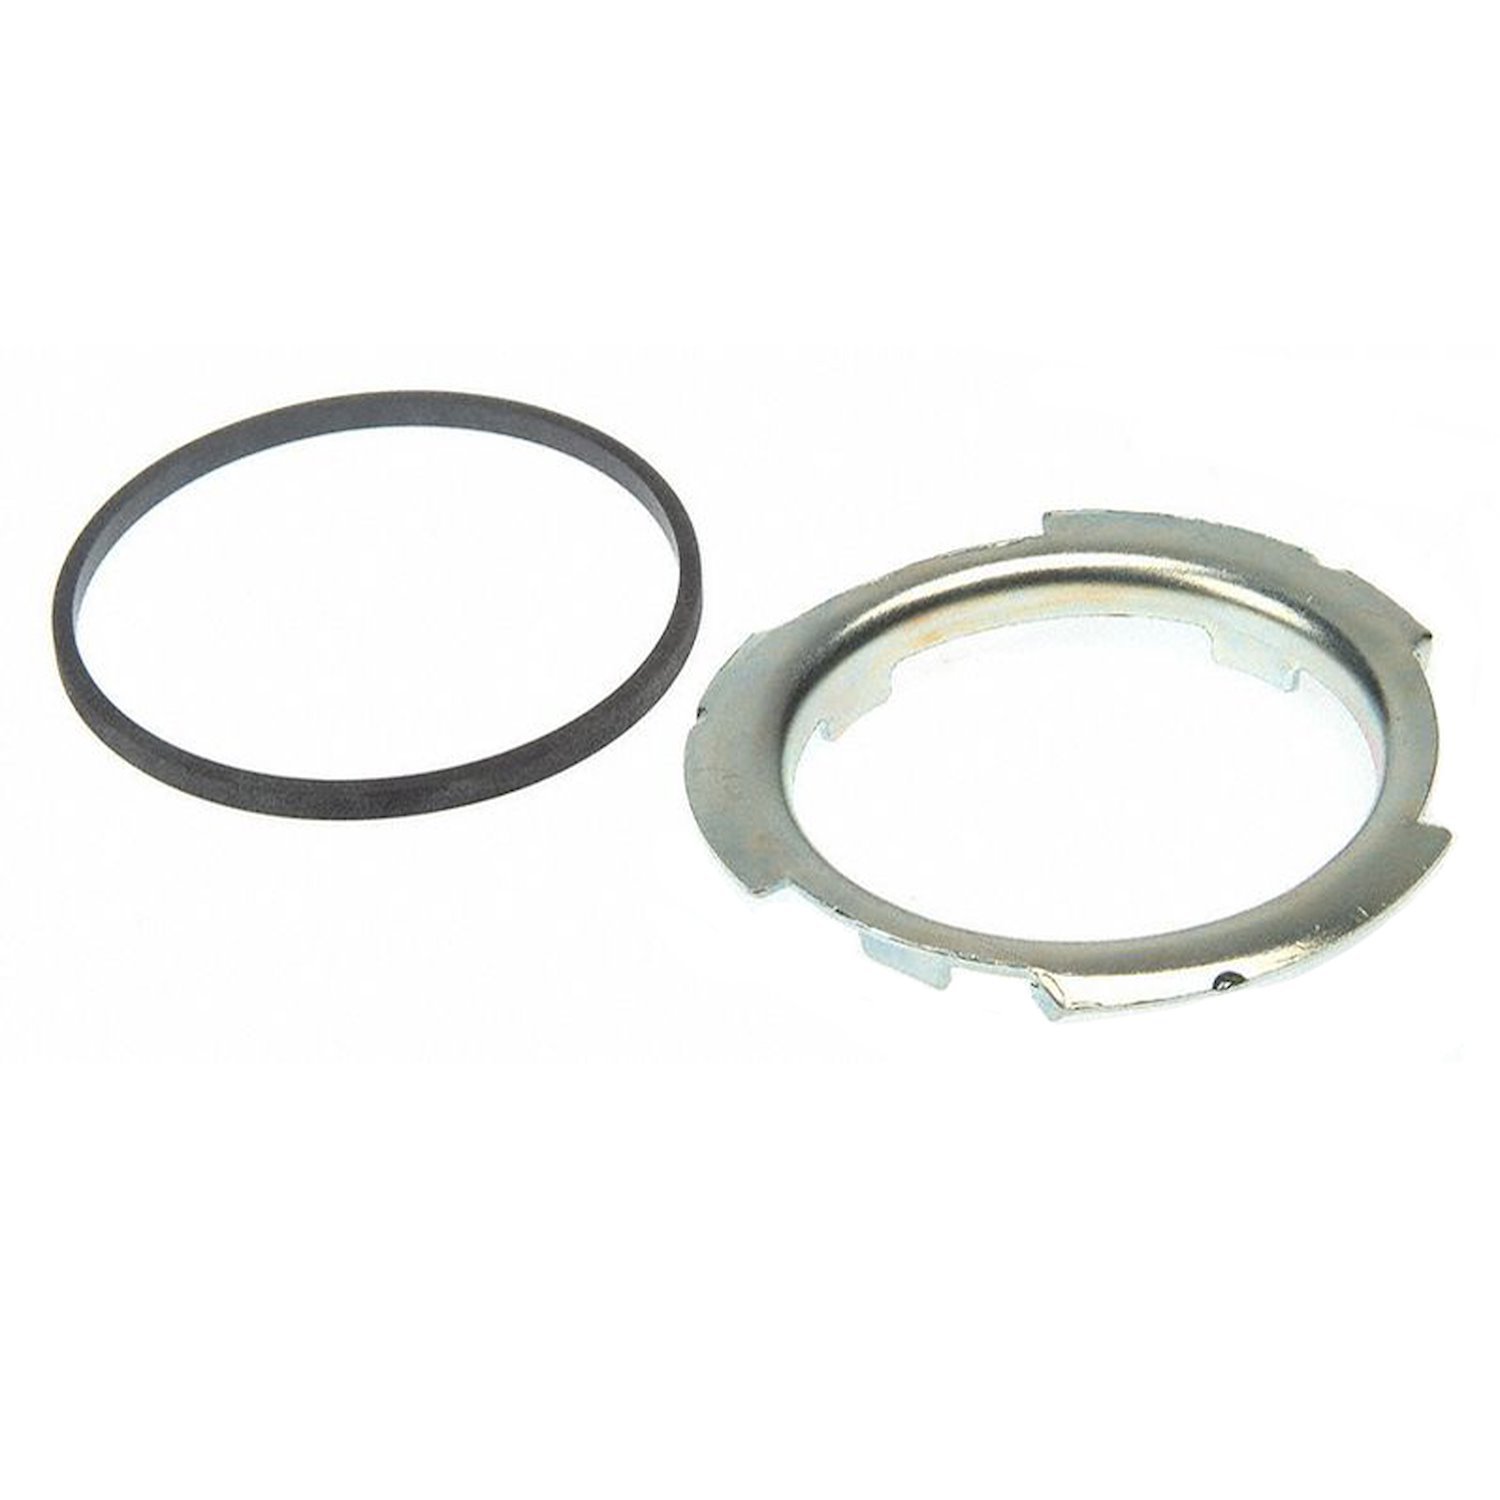 Fuel Tank Lock Ring for 1980-1993 Ford